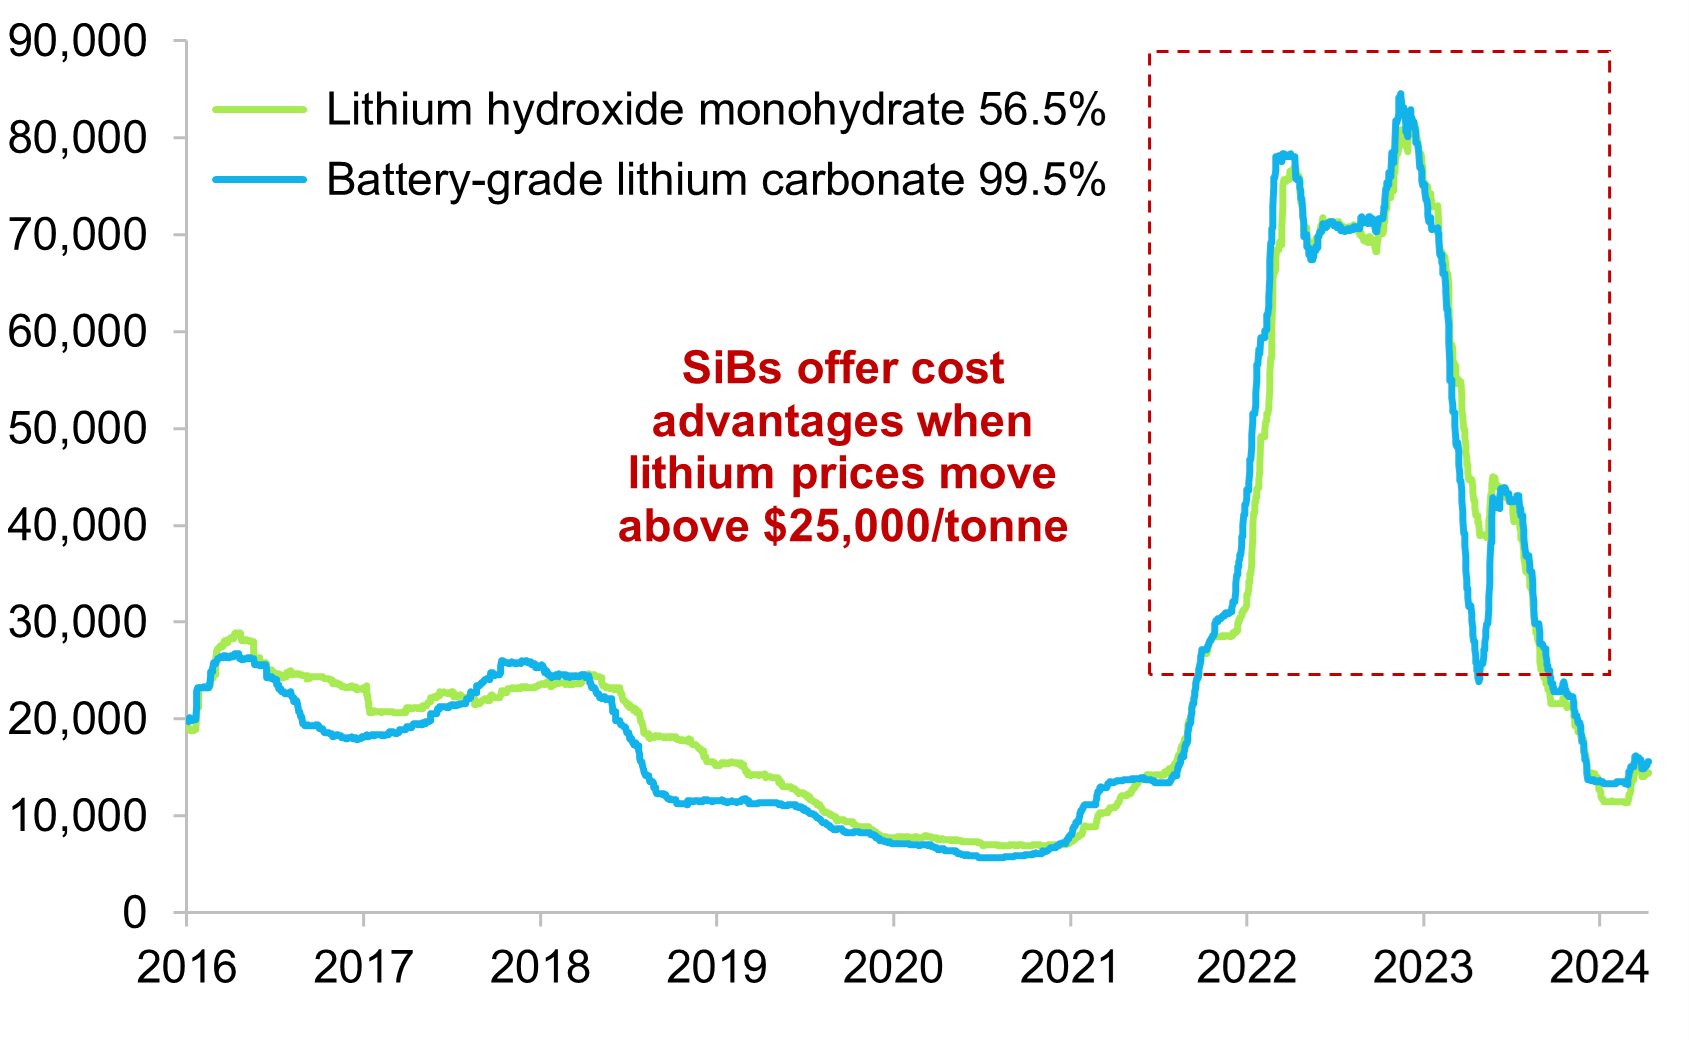 China lithium prices, 2016 to 2024